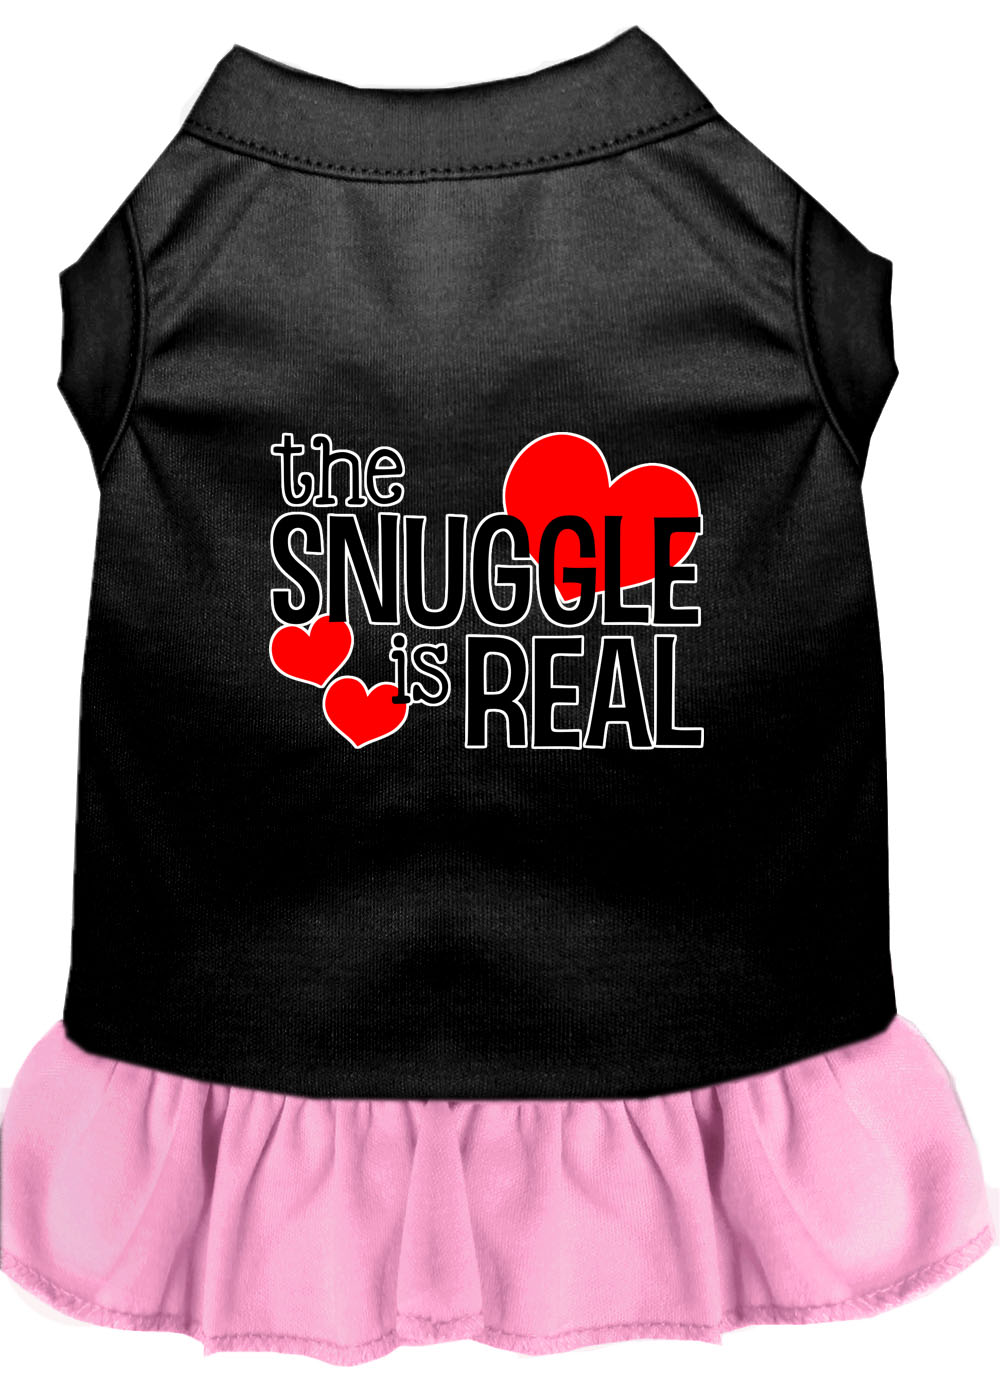 The Snuggle is Real Screen Print Dog Dress Black with Light Pink Med